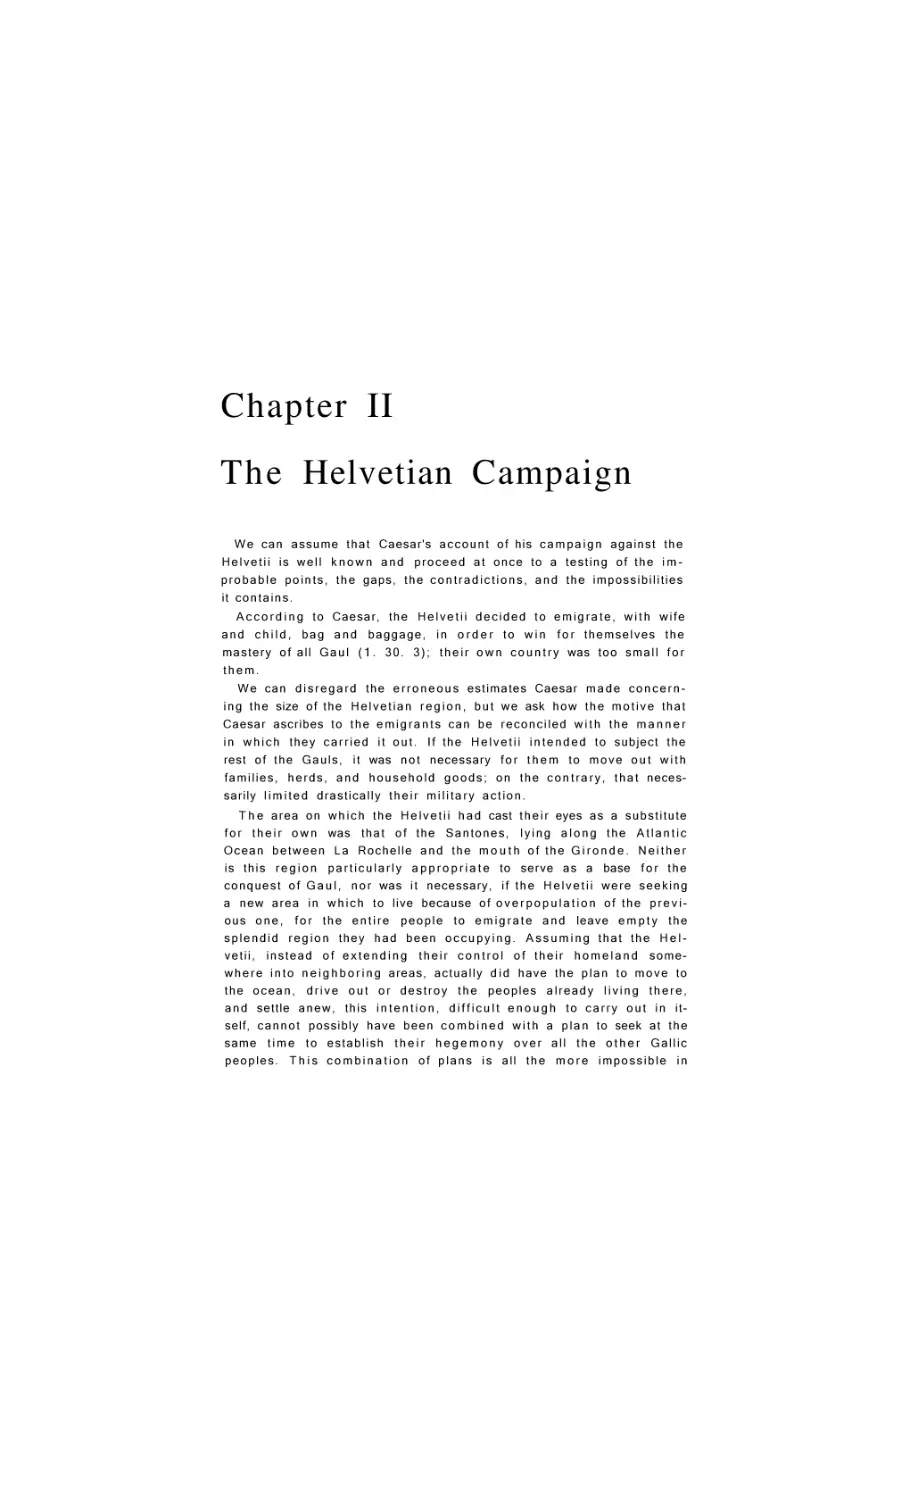 The Helvetian Campaign